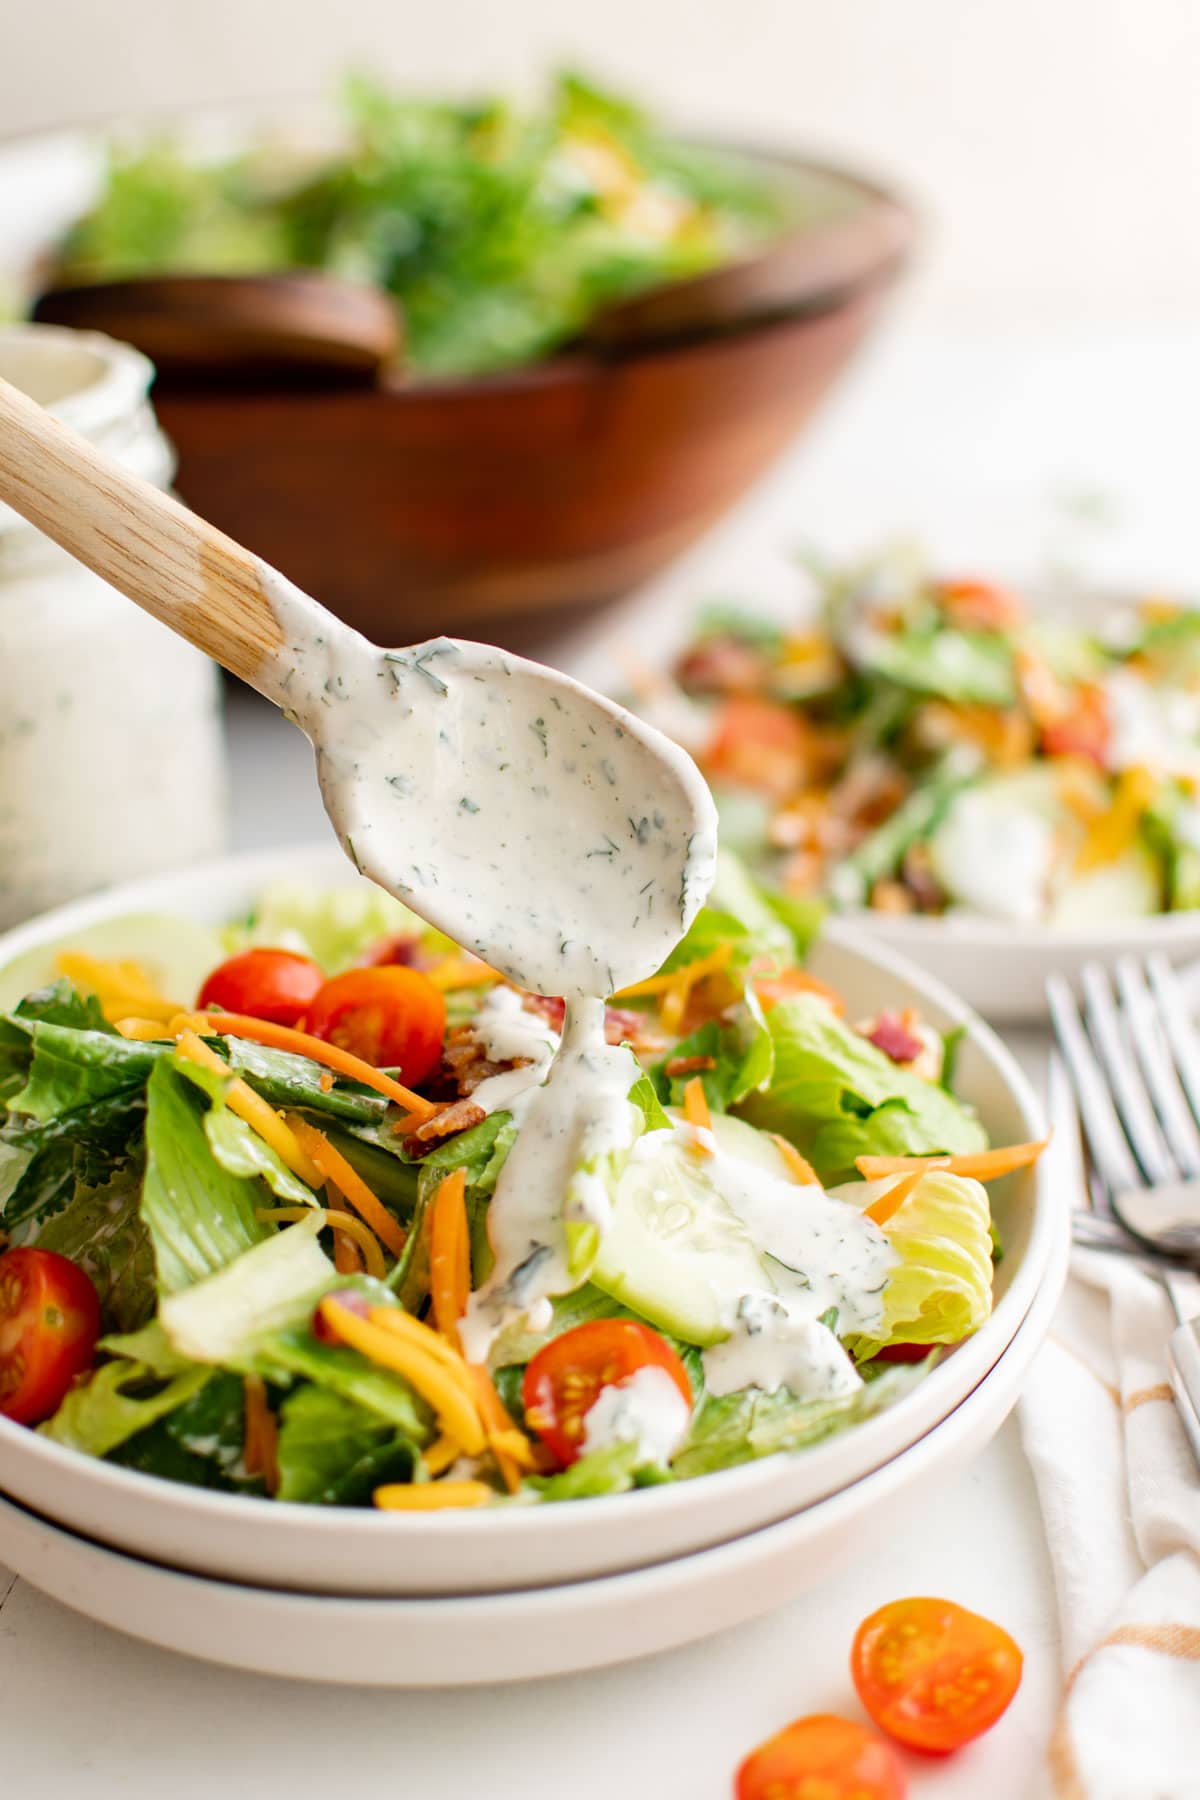 A small wooden spoon drizzling ranch dressing over a salad in a bowl.